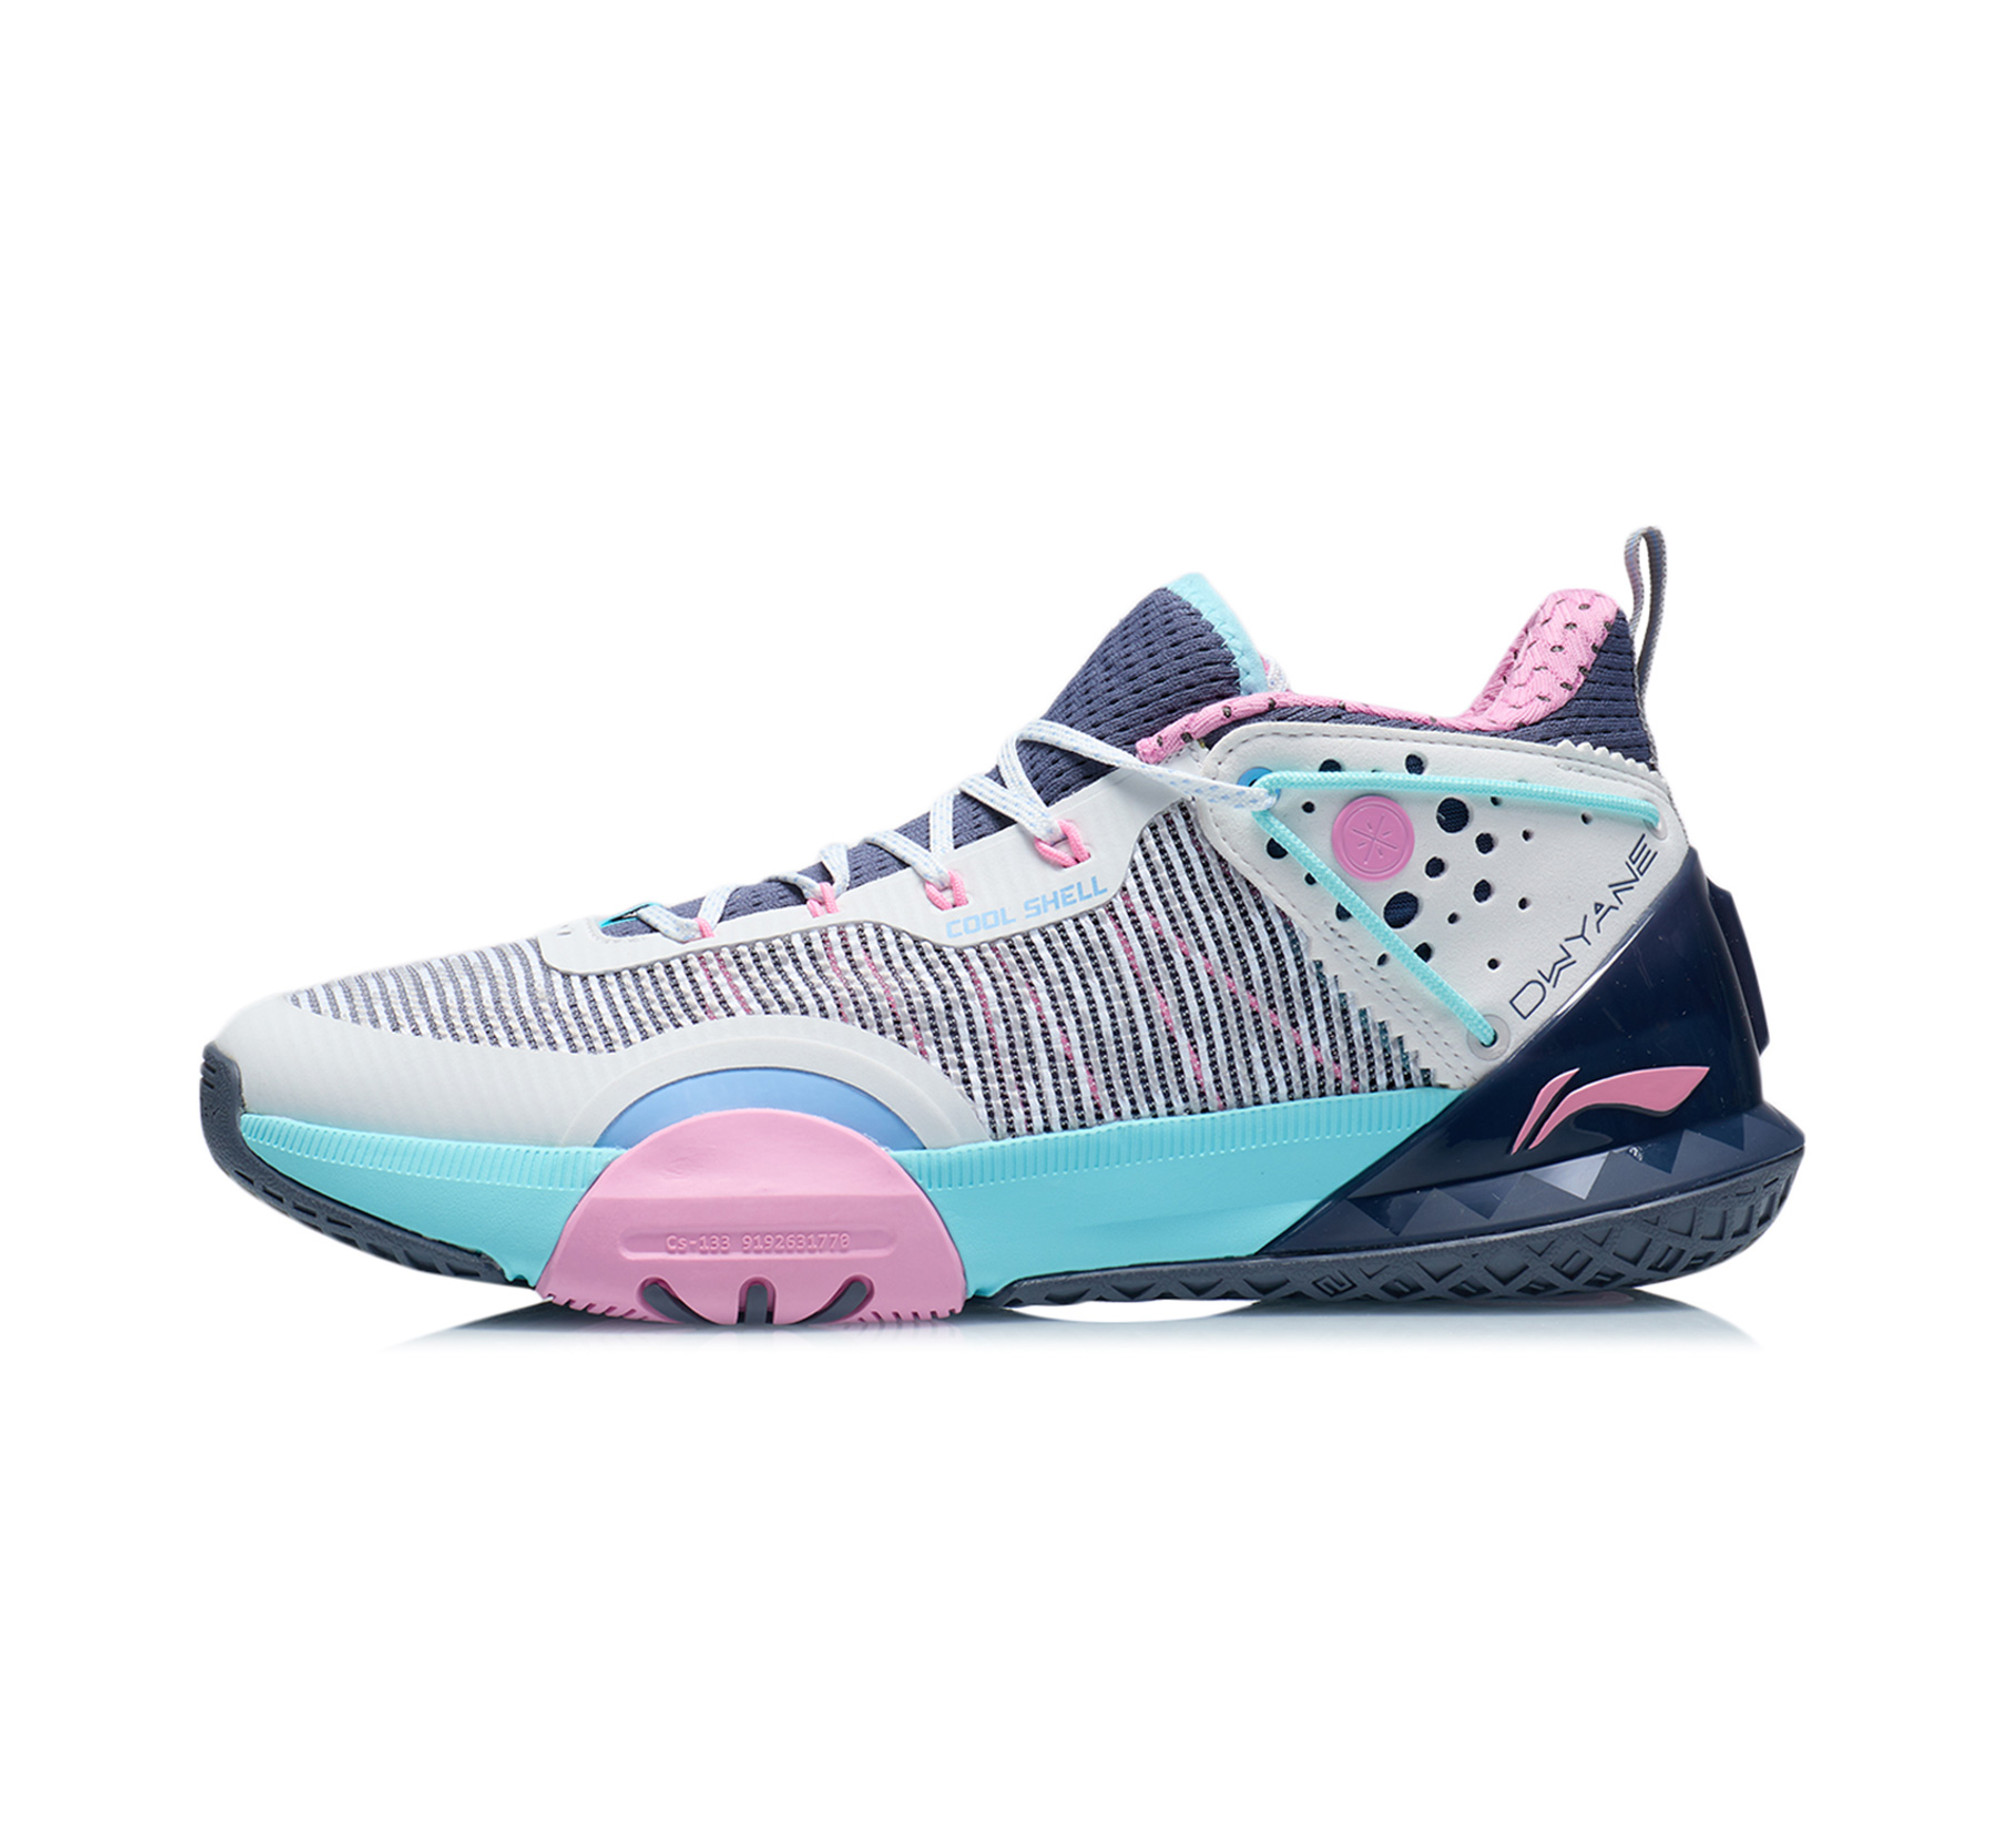 Wade All Day 6 V2 ABPR029-3 Basketball Shoe | Shop online now at ...